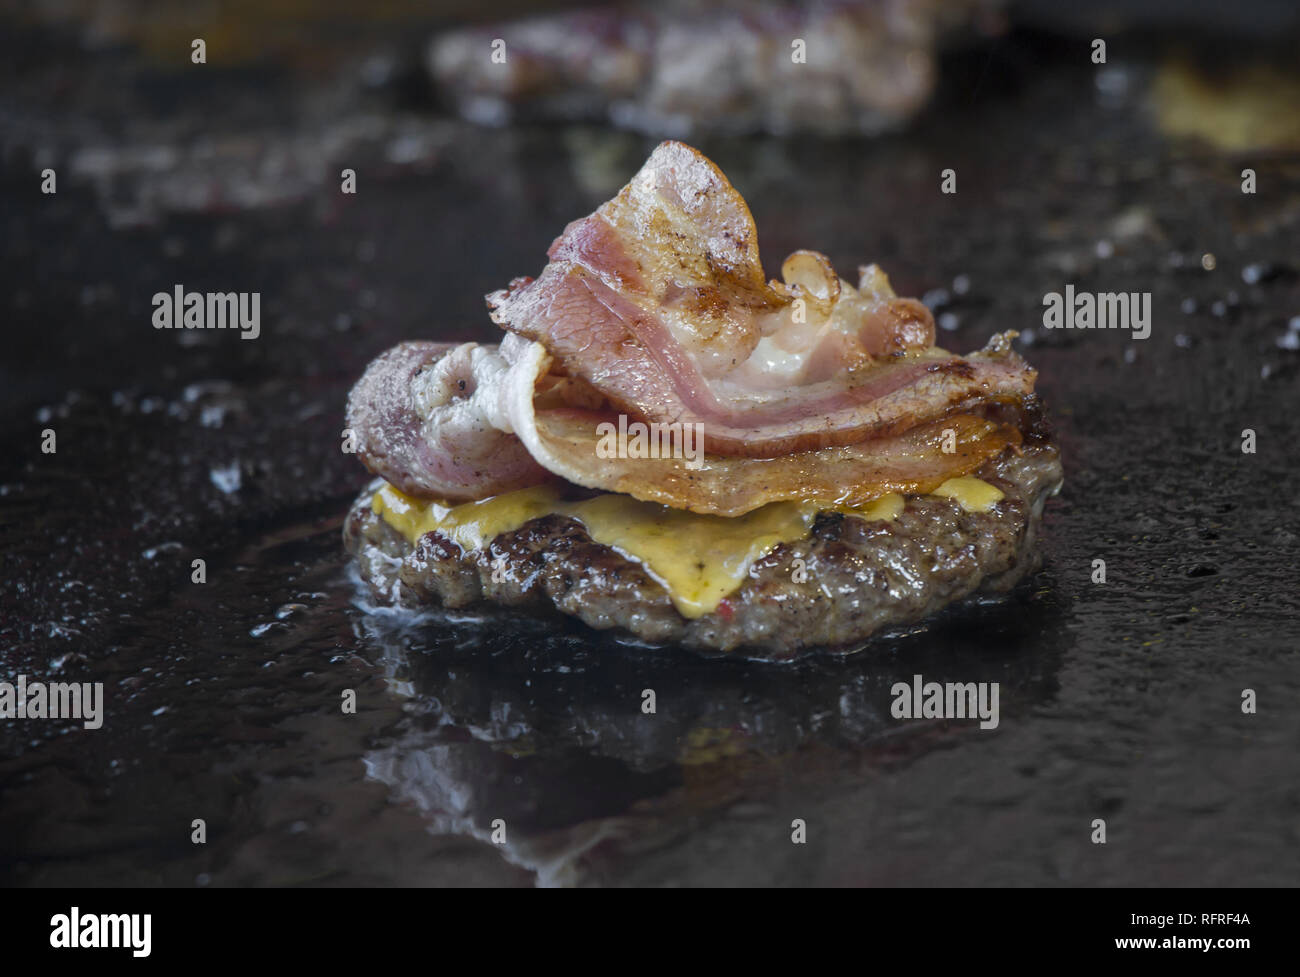 Preparing burgers with bacon at the barbecue outdoors Stock Photo